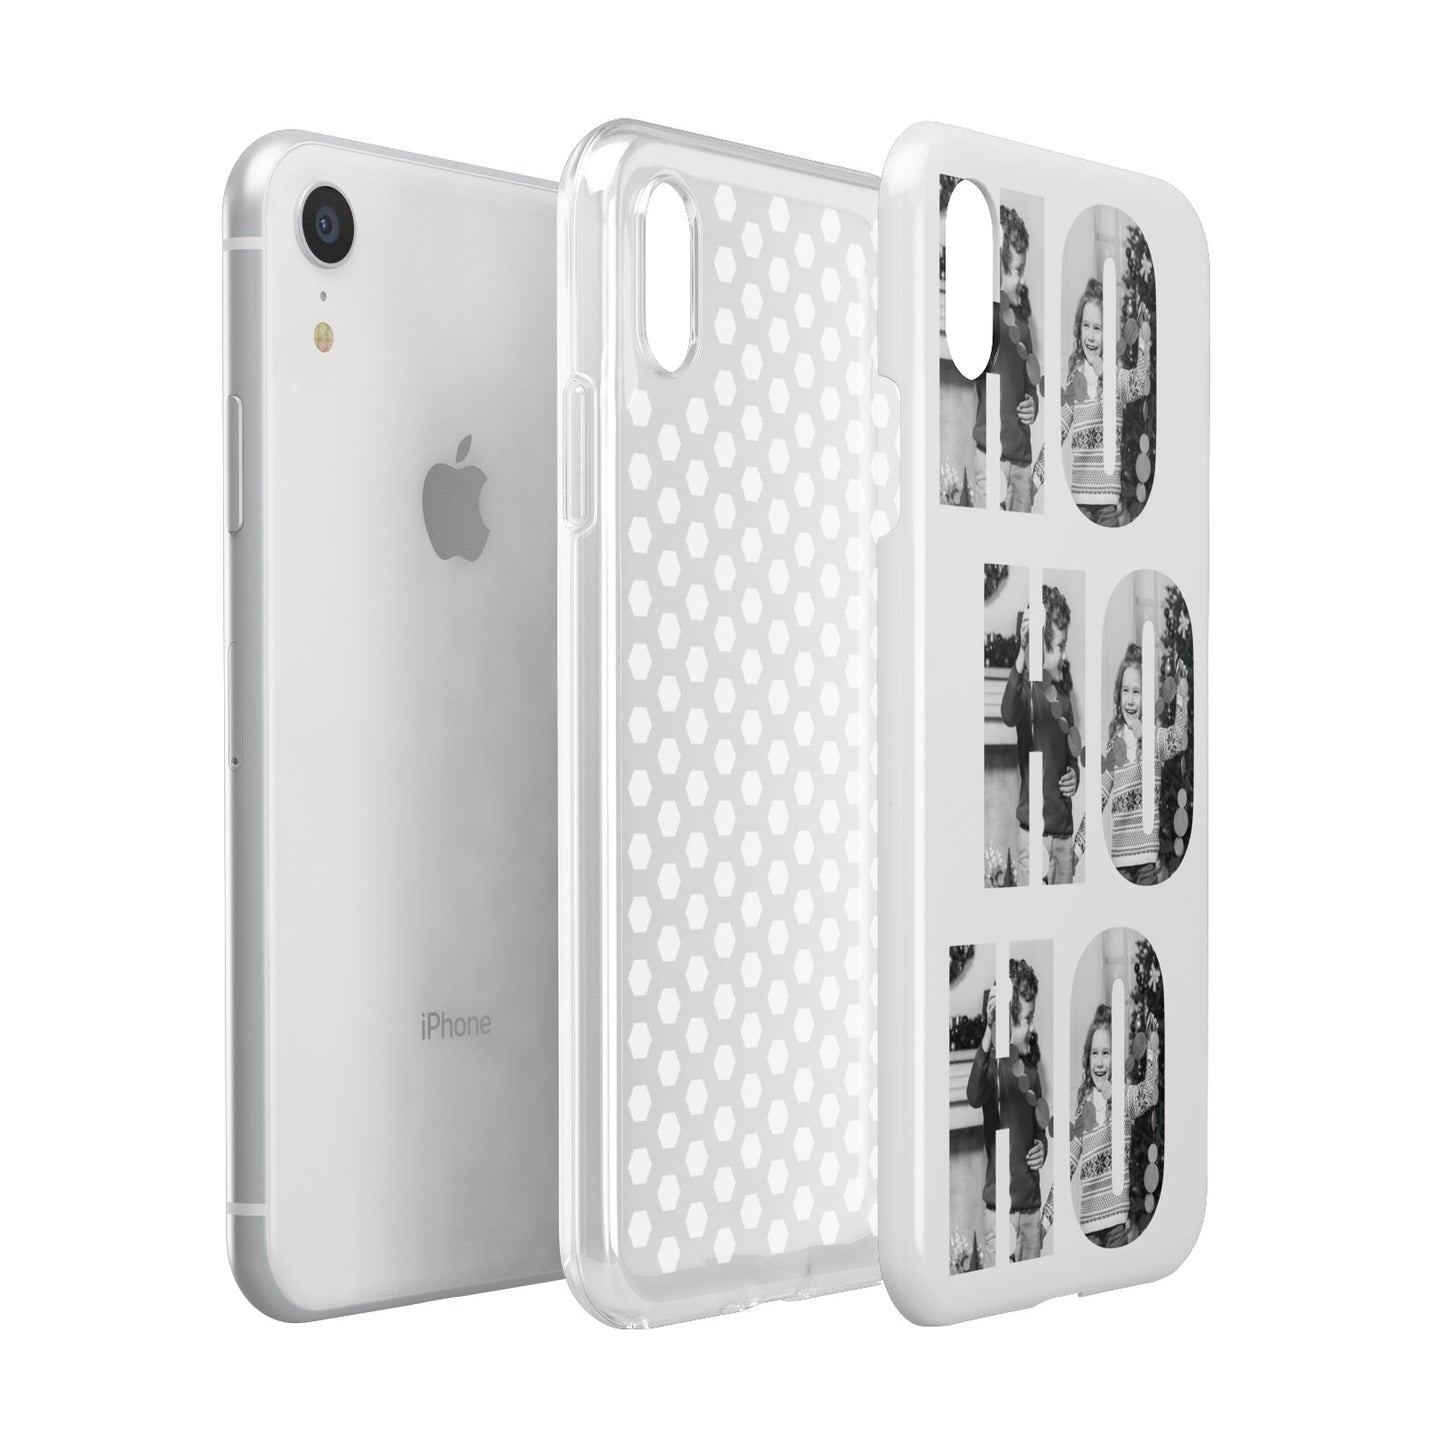 Ho Ho Ho Photo Upload Christmas Apple iPhone XR White 3D Tough Case Expanded view